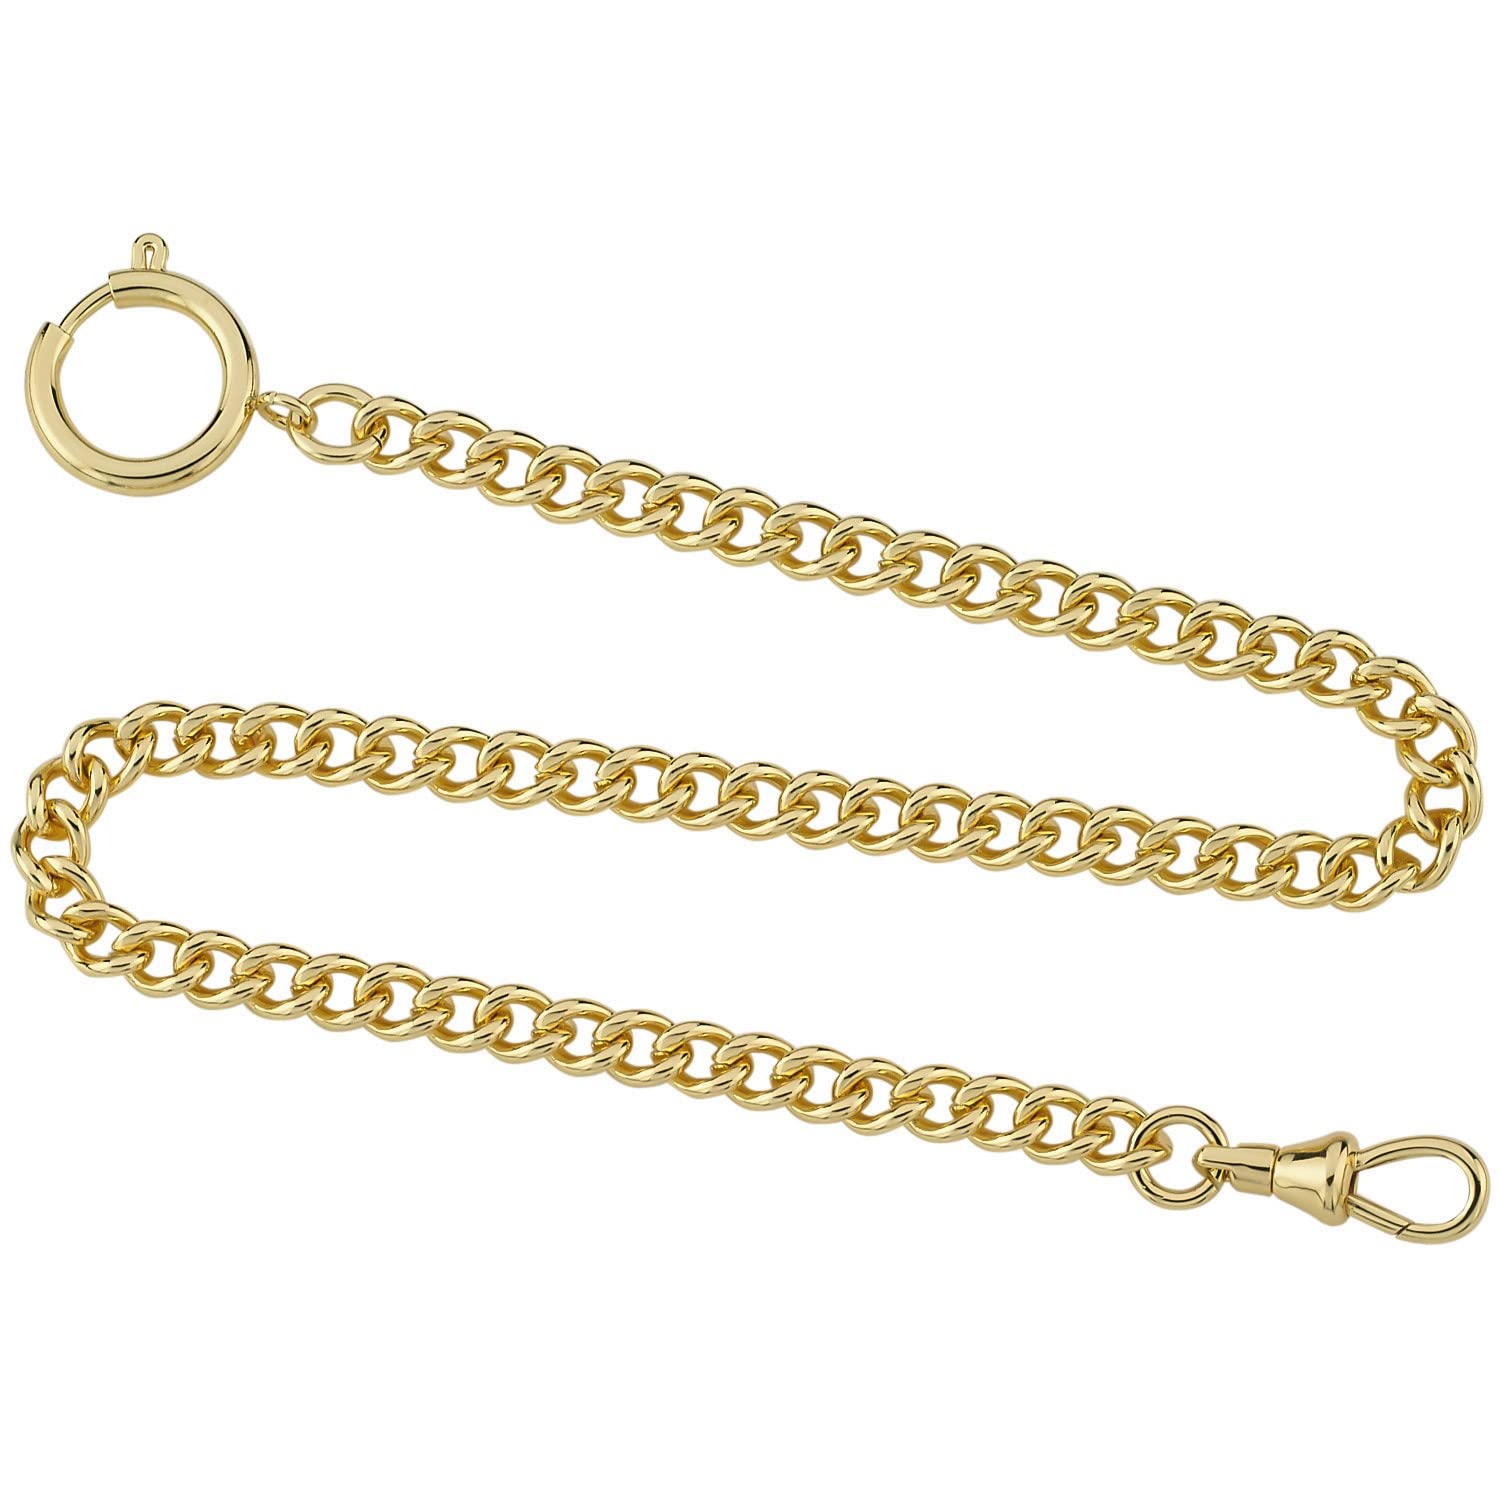 Gotham Gold-Tone Stainless Steel Pocket Watch Chain Fob Curb Link 14